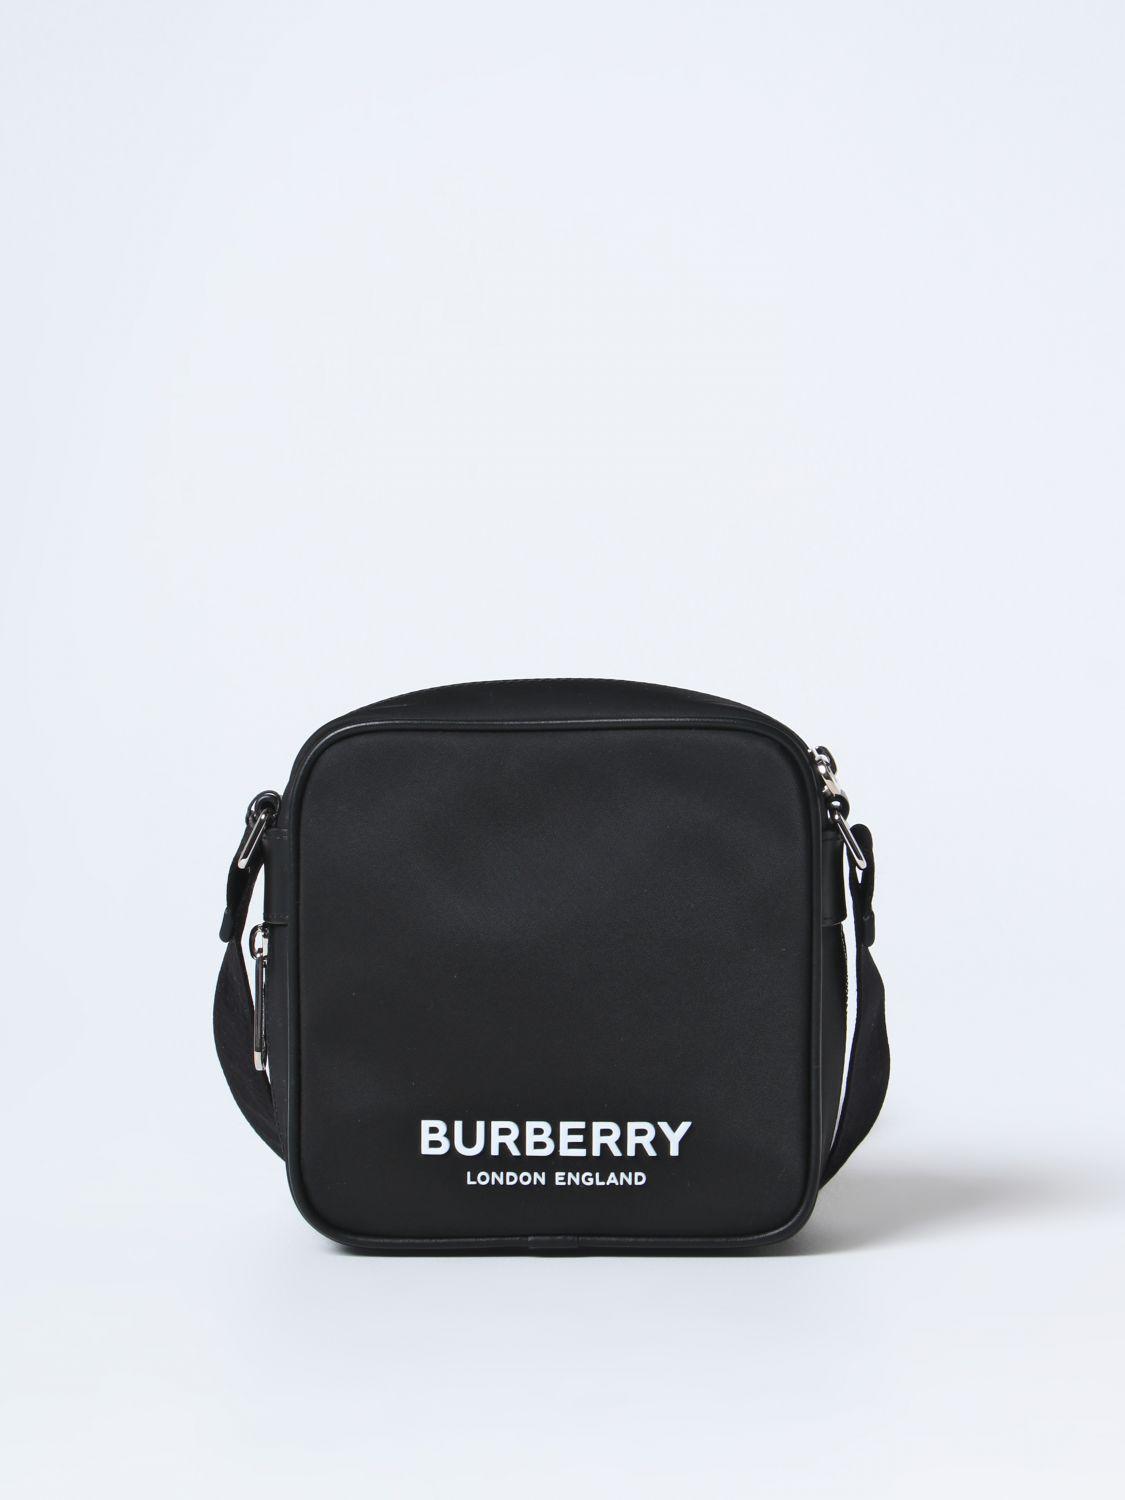 Bags for man by Burberry